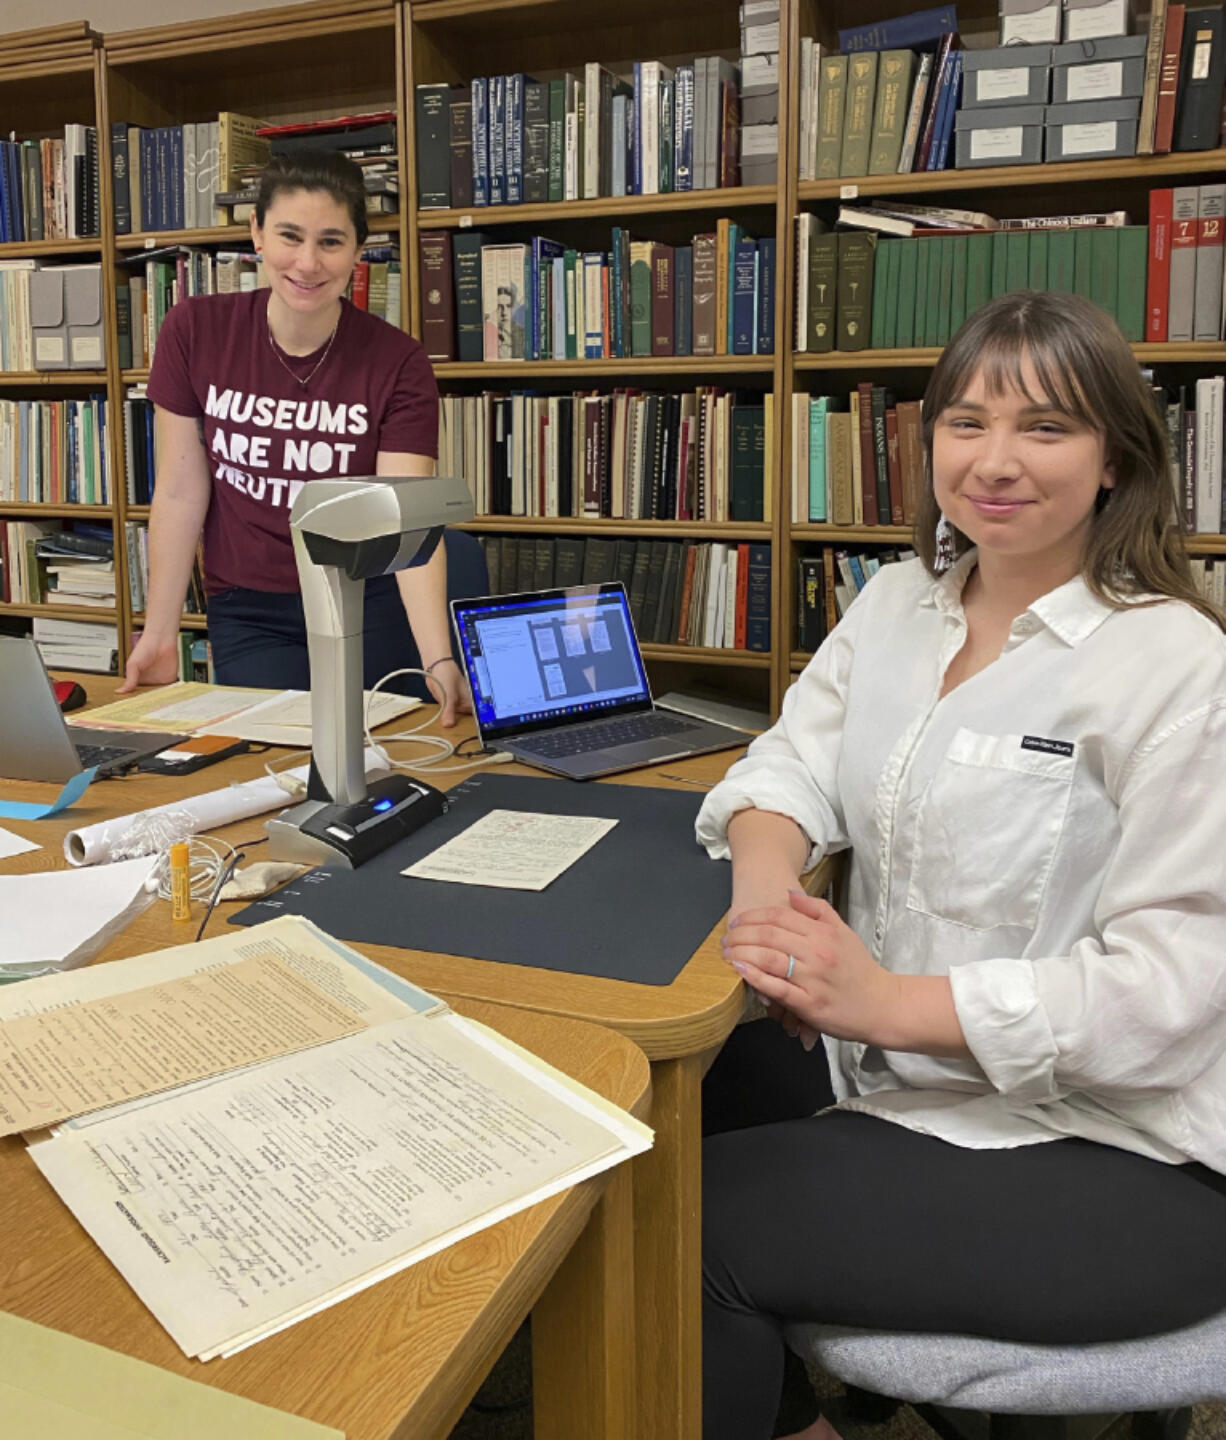 The National Native American Boarding School Healing Coalition staff and partners are digitizing Indian boarding school records from the National Archives in Seattle. The NABS says it will digitize 20,000 archival pages related to Quaker-operated Indian boarding schools.